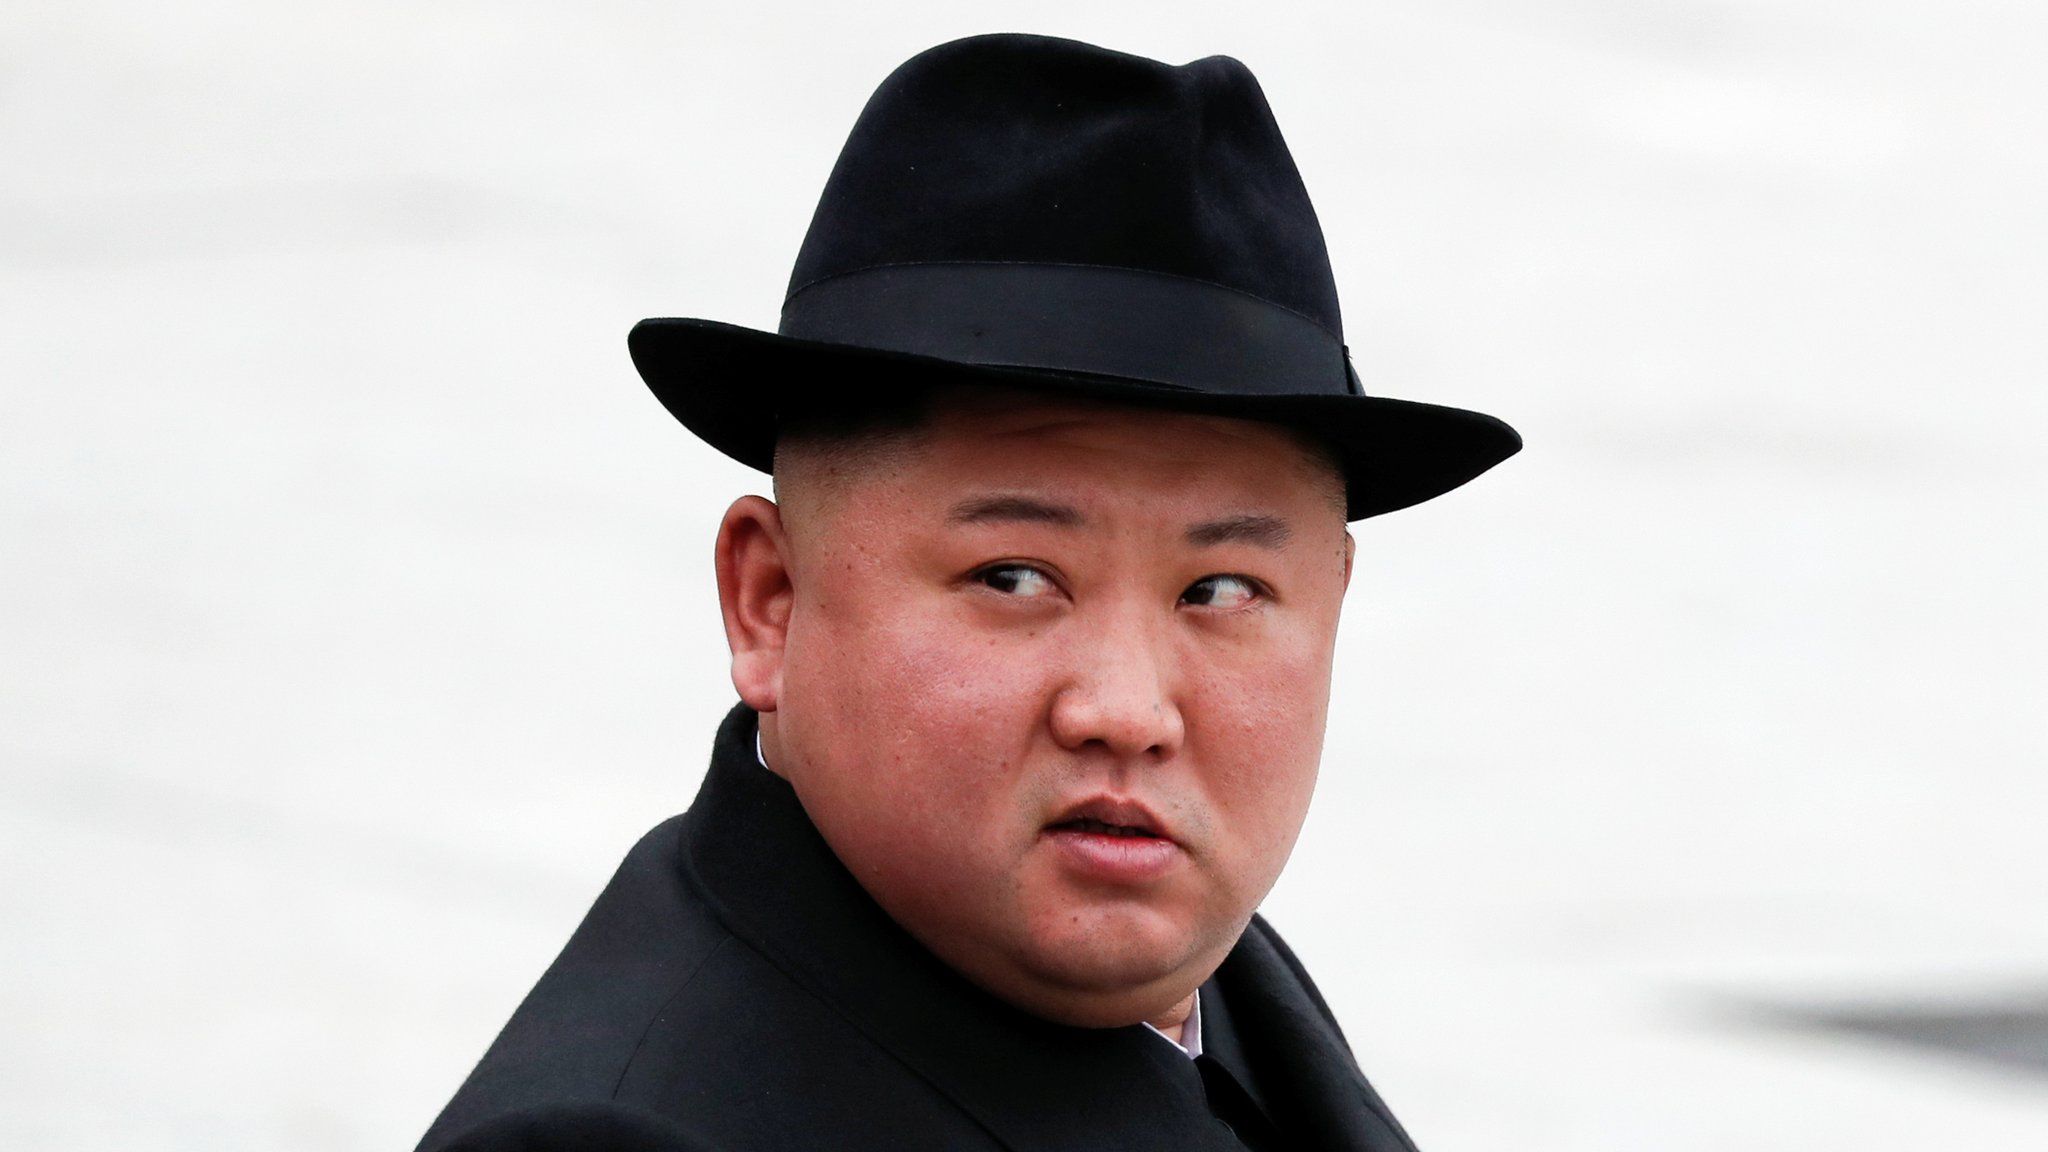 North Korean leader Kim Jong Un looks on after attending a wreath laying ceremony at a navy memorial in Vladivostok